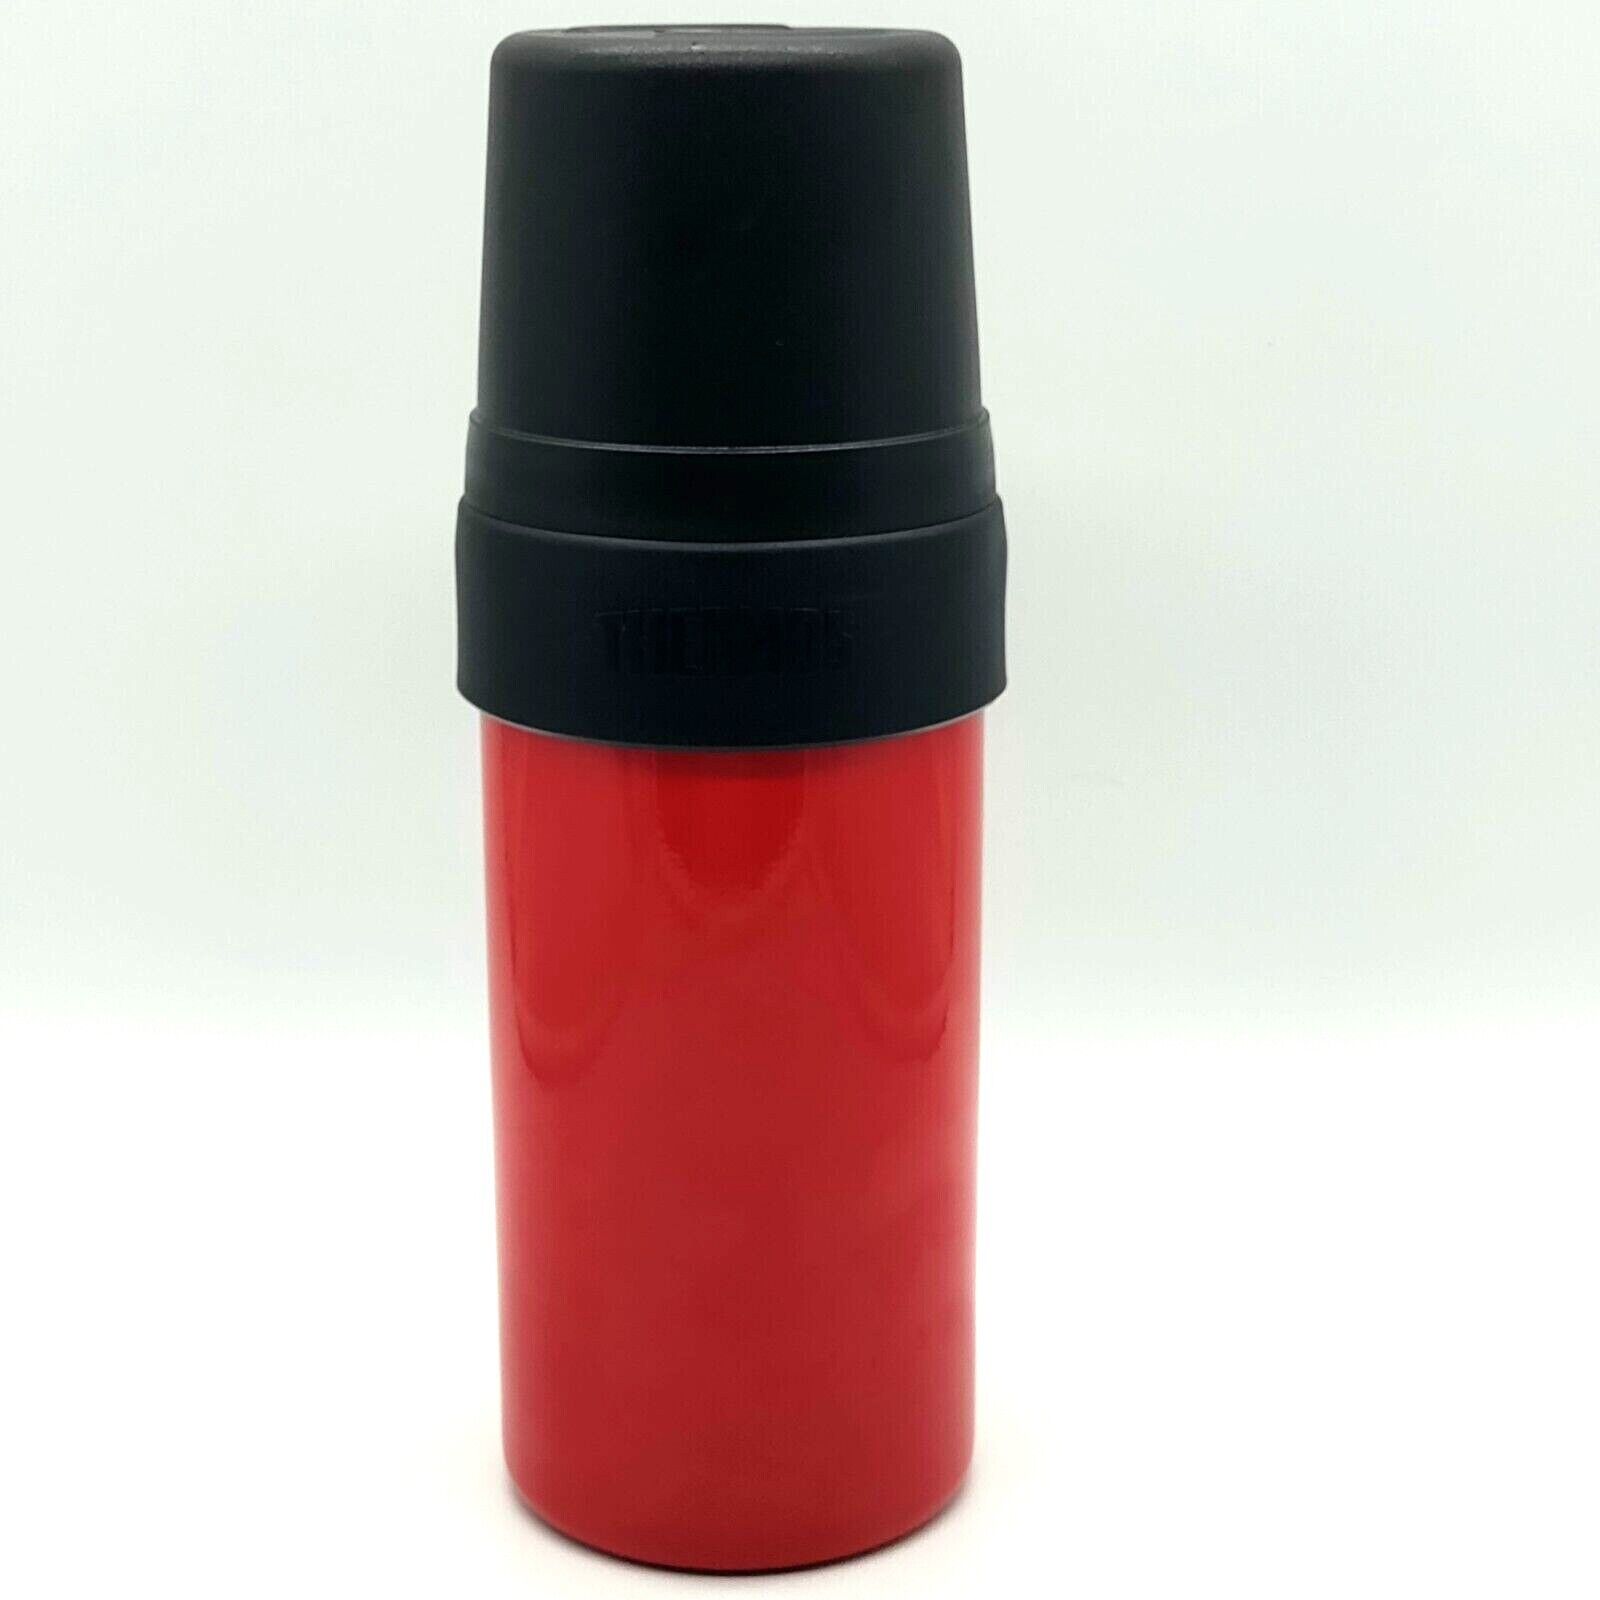 Vintage THERMOS Red Black 1Qt Hot Cold Steel Bottle Original Box Coffee Camping